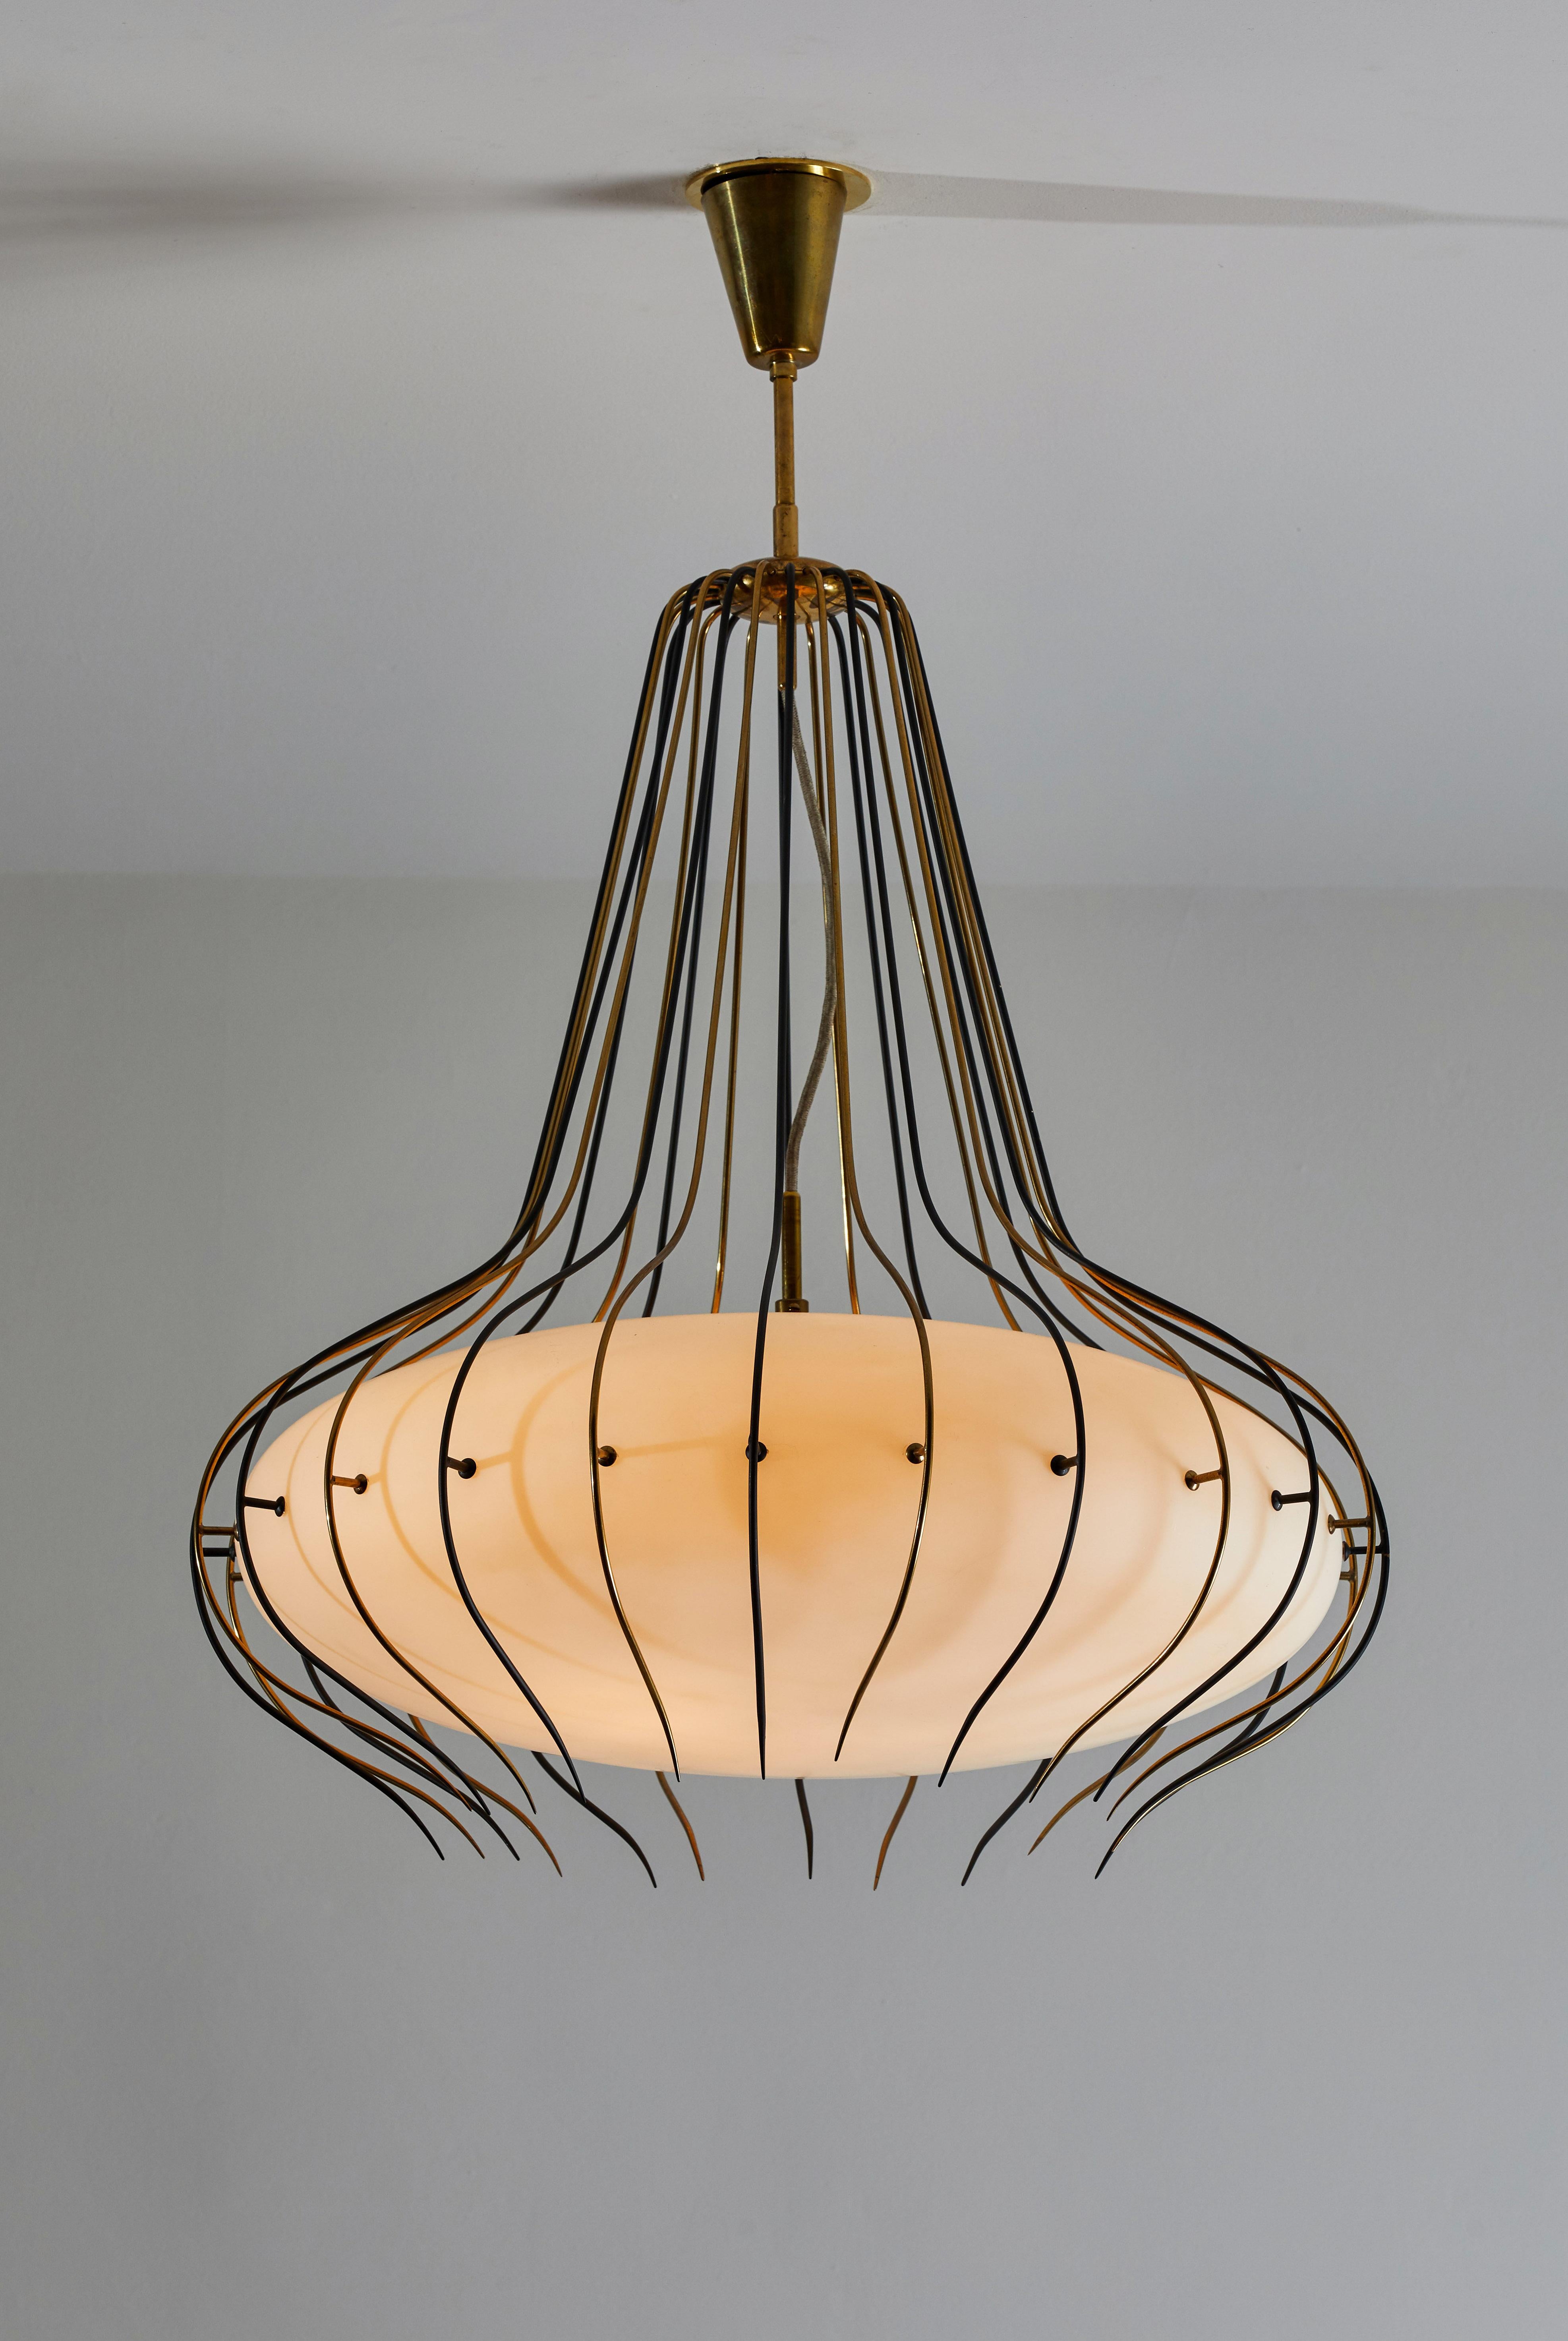 Suspension light by Angelo Lelli for Arredoluce. Designed and manufactured in Italy, circa 1950's. Brushed satin glass diffuser, enameled metal, brass. Original brass canopy, custom brass ceiling light. Takes three E27 60w maximum bulbs. Bulbs